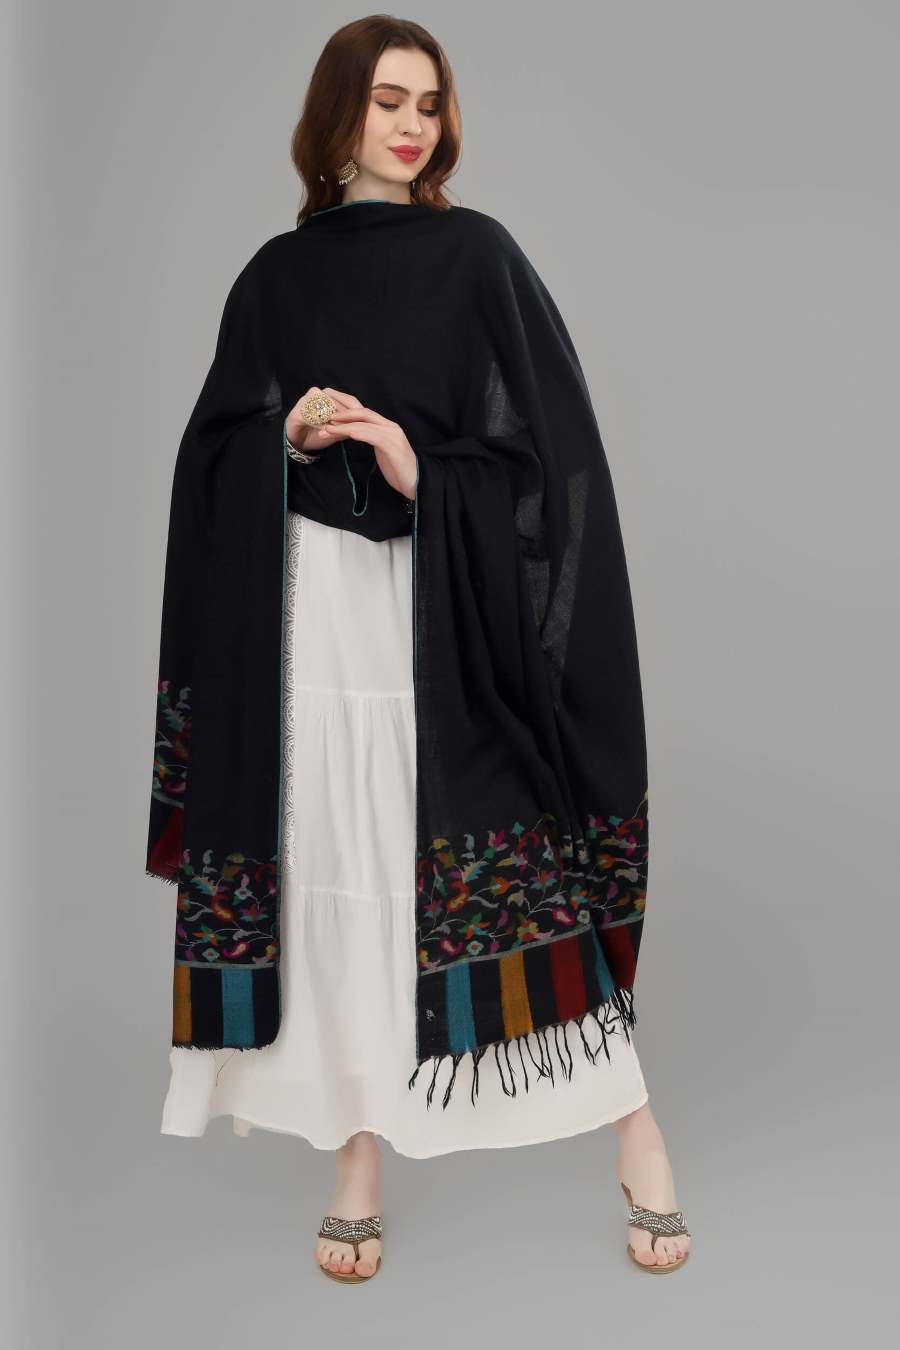 "KANI SHAWL - The Stylish and Luxurious Black Kani Pashmina Shawl, Crafted in Flower Designs on the Pallas in All the Ravishing Colors, Available online at - SWEDEN - HONGKONG - SPAIN - USA - CANADA - JAPAN - SOUTH AFRICA - GREECE - KUWAIT - NORWAY."